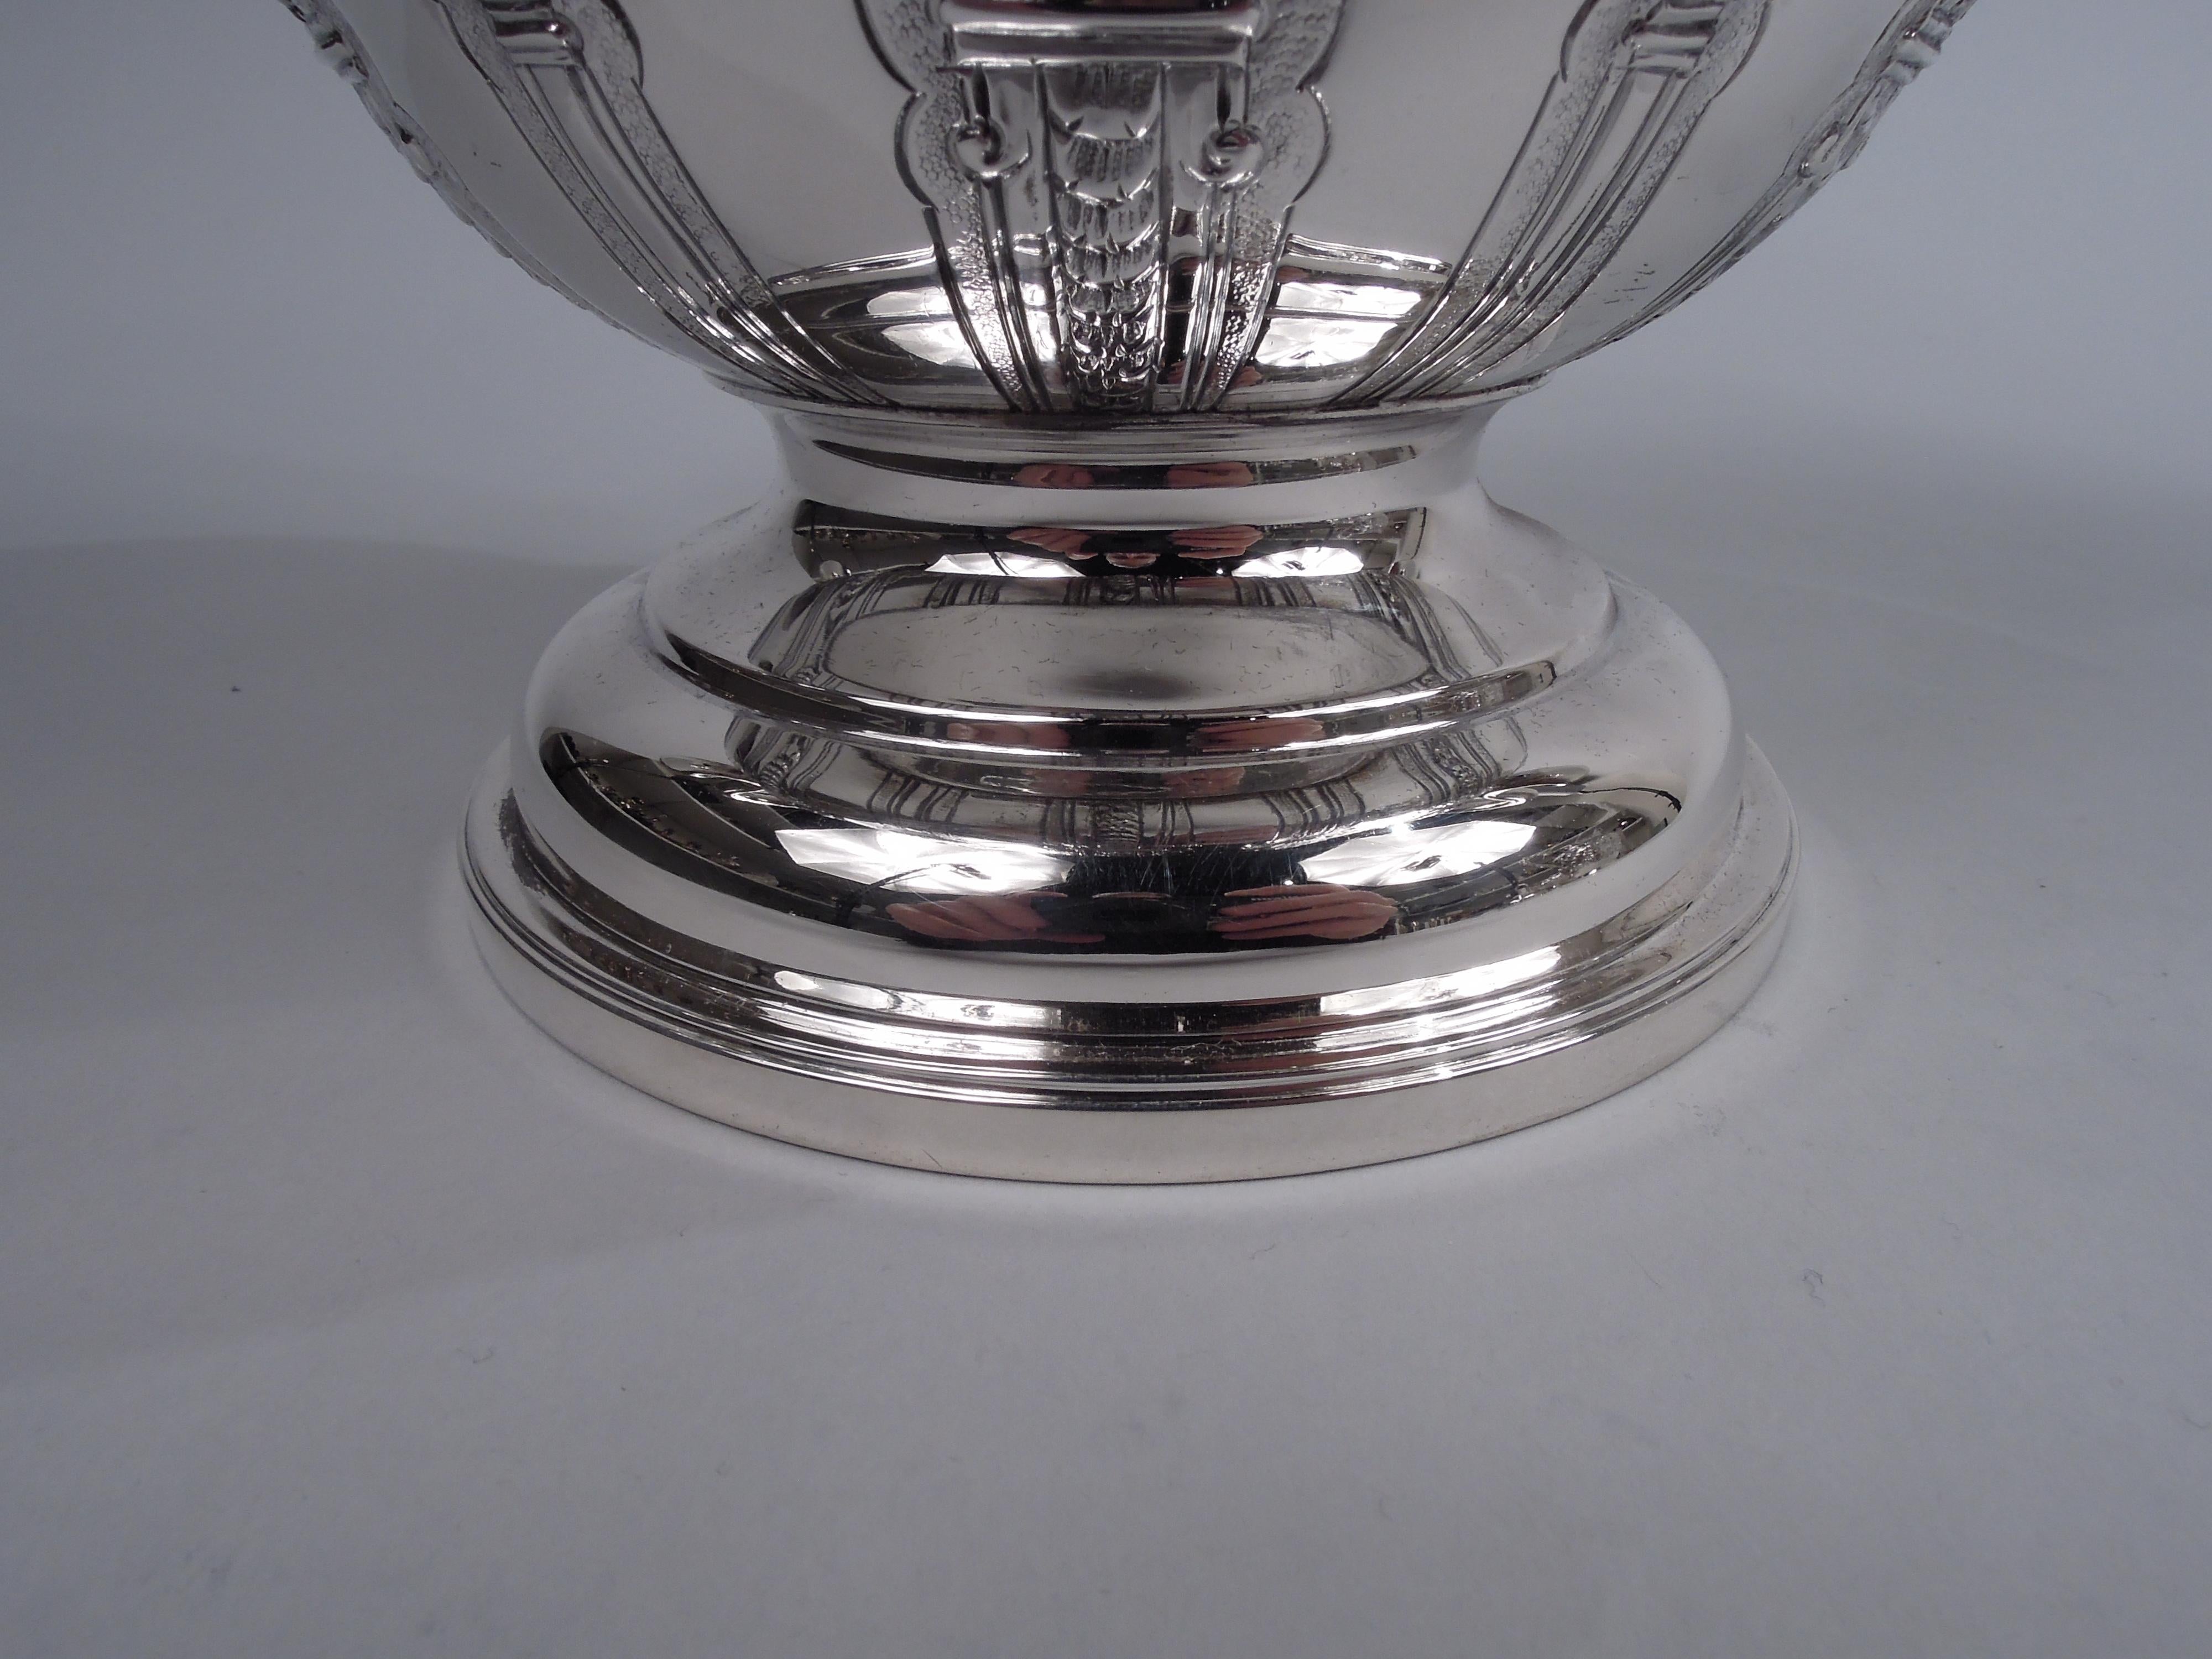 Crichton English Neoclassical Sterling Silver Covered Urn 1916 For Sale 5